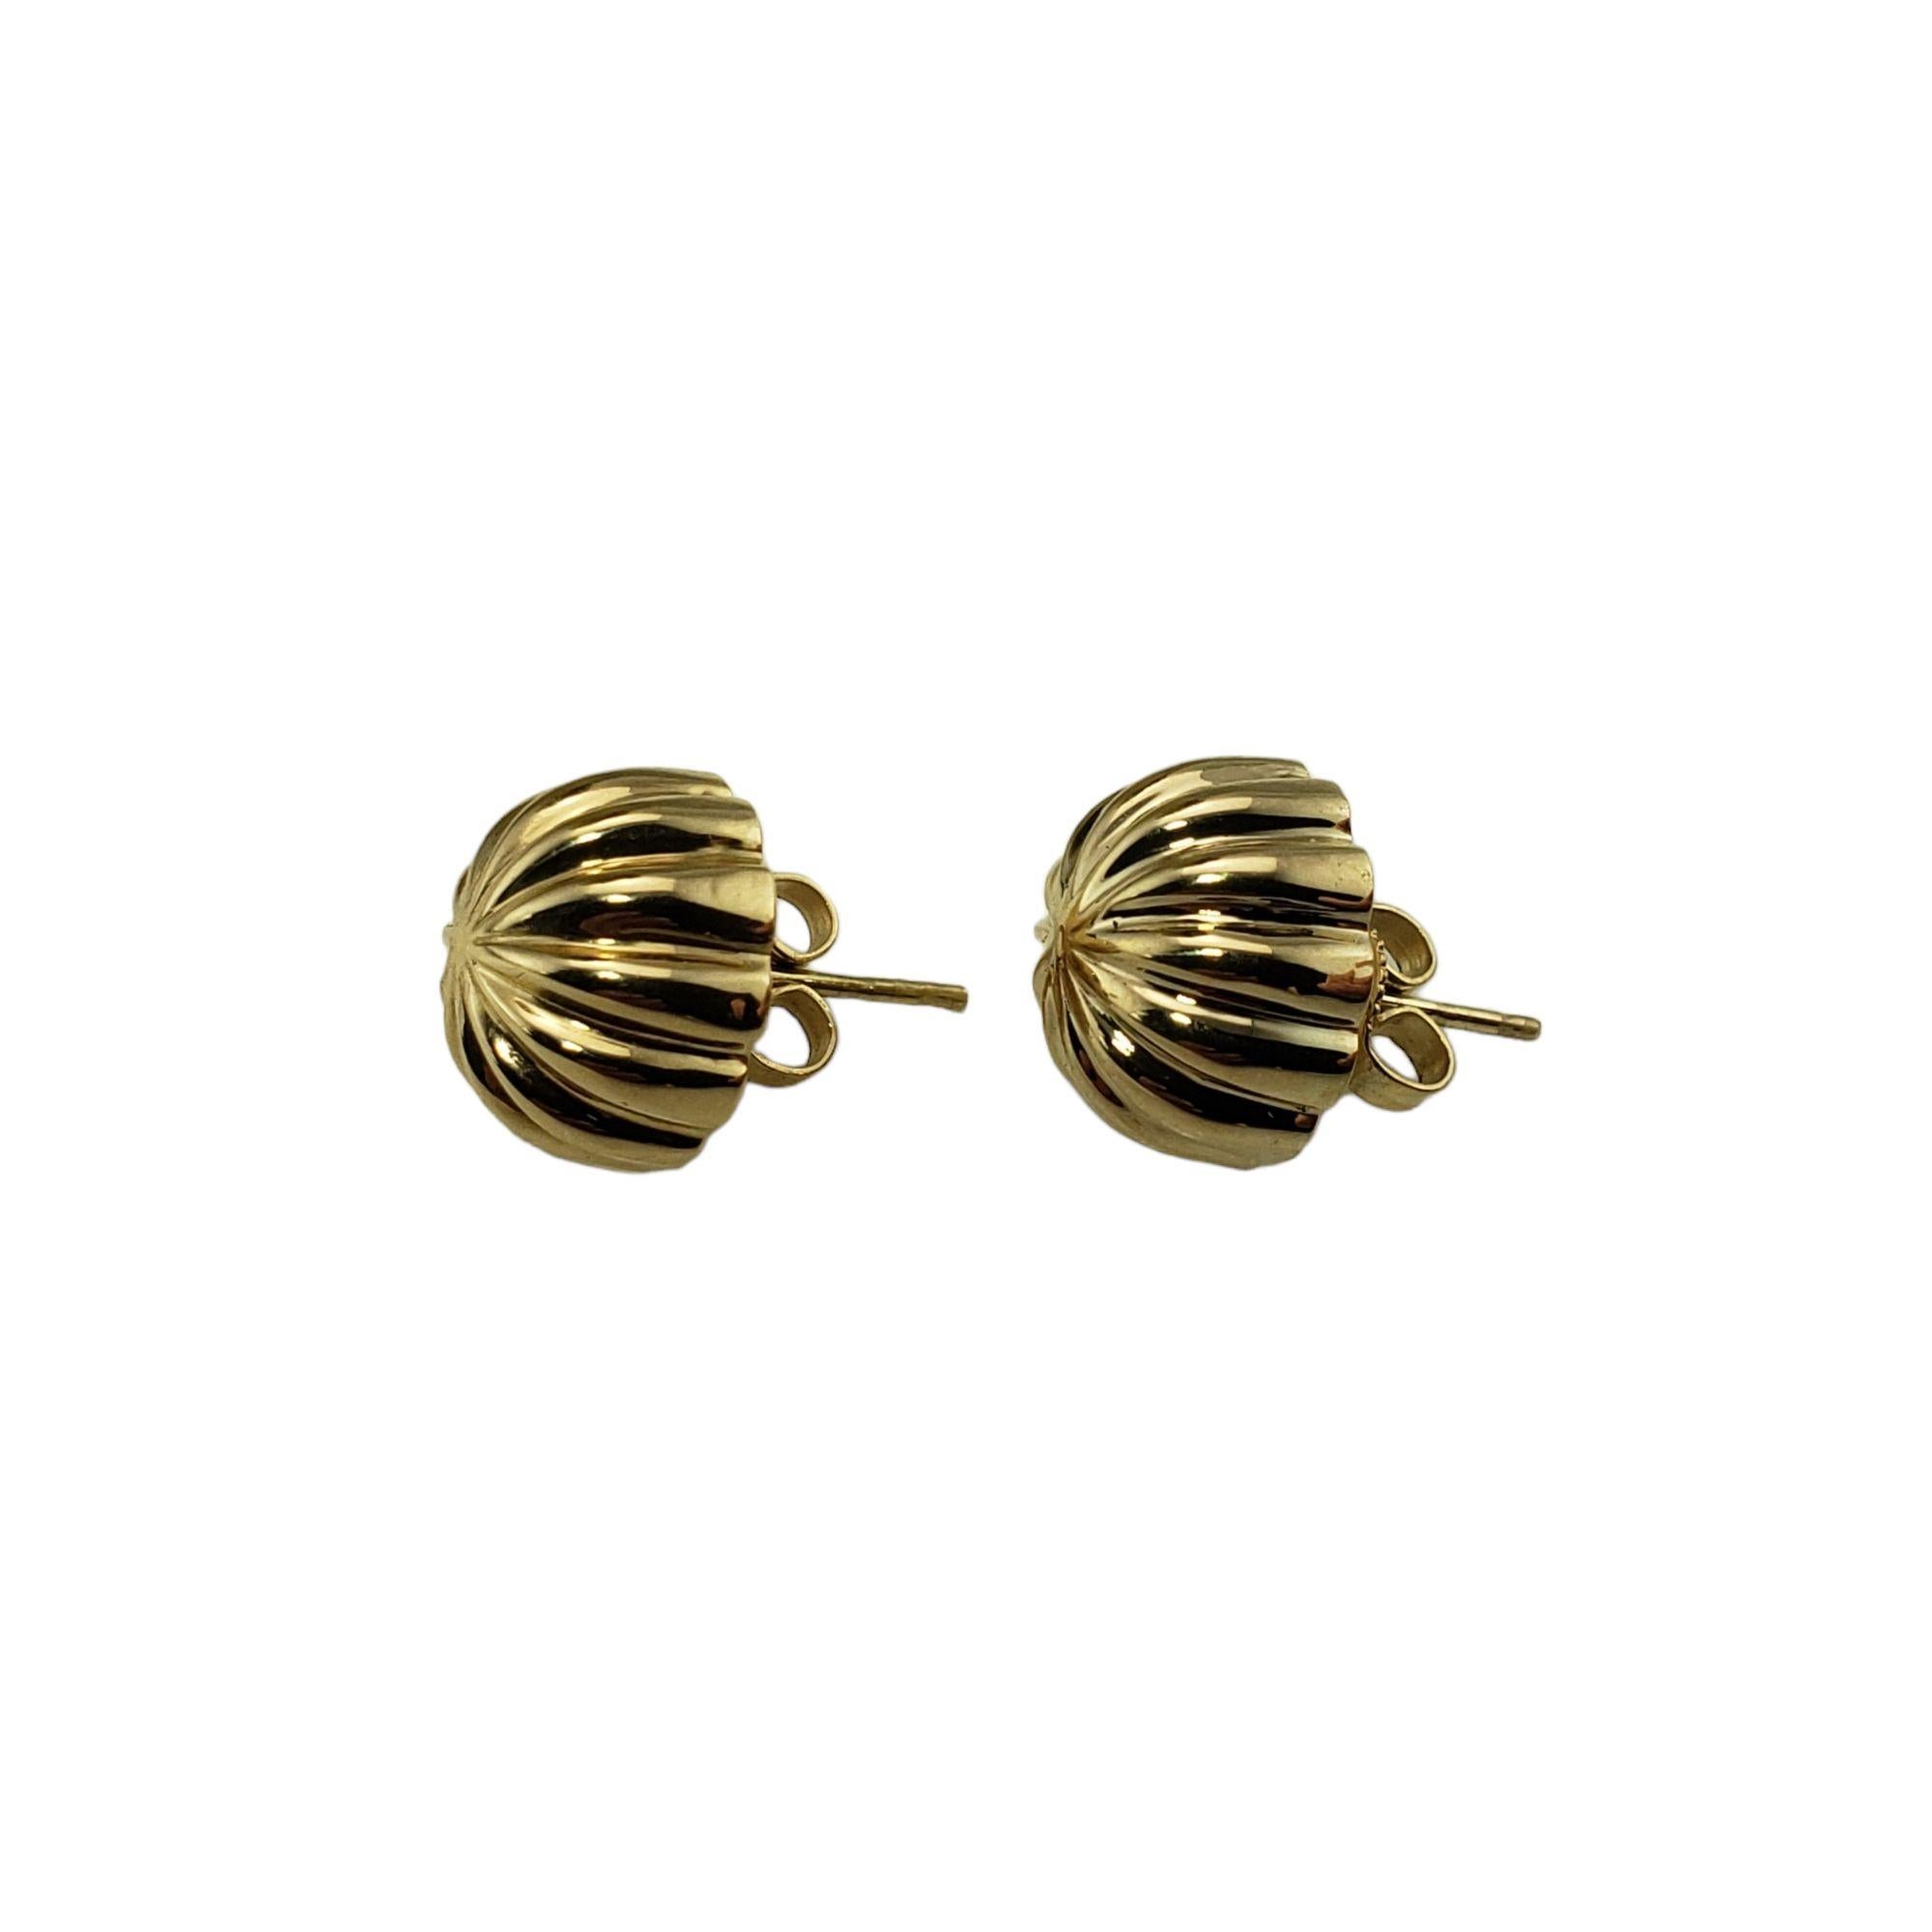 Vintage Tiffany & Co. 14 Karat Yellow Gold Stud Earrings-

These stunning Tiffany earrings are crafted in beautifully detailed 14K yellow gold. Height: 6 mm.

Size: 11 mm

Weight: 1.8 dwt. / 2.8 gr.

Hallmark: Tiffany

*Earring backs are not